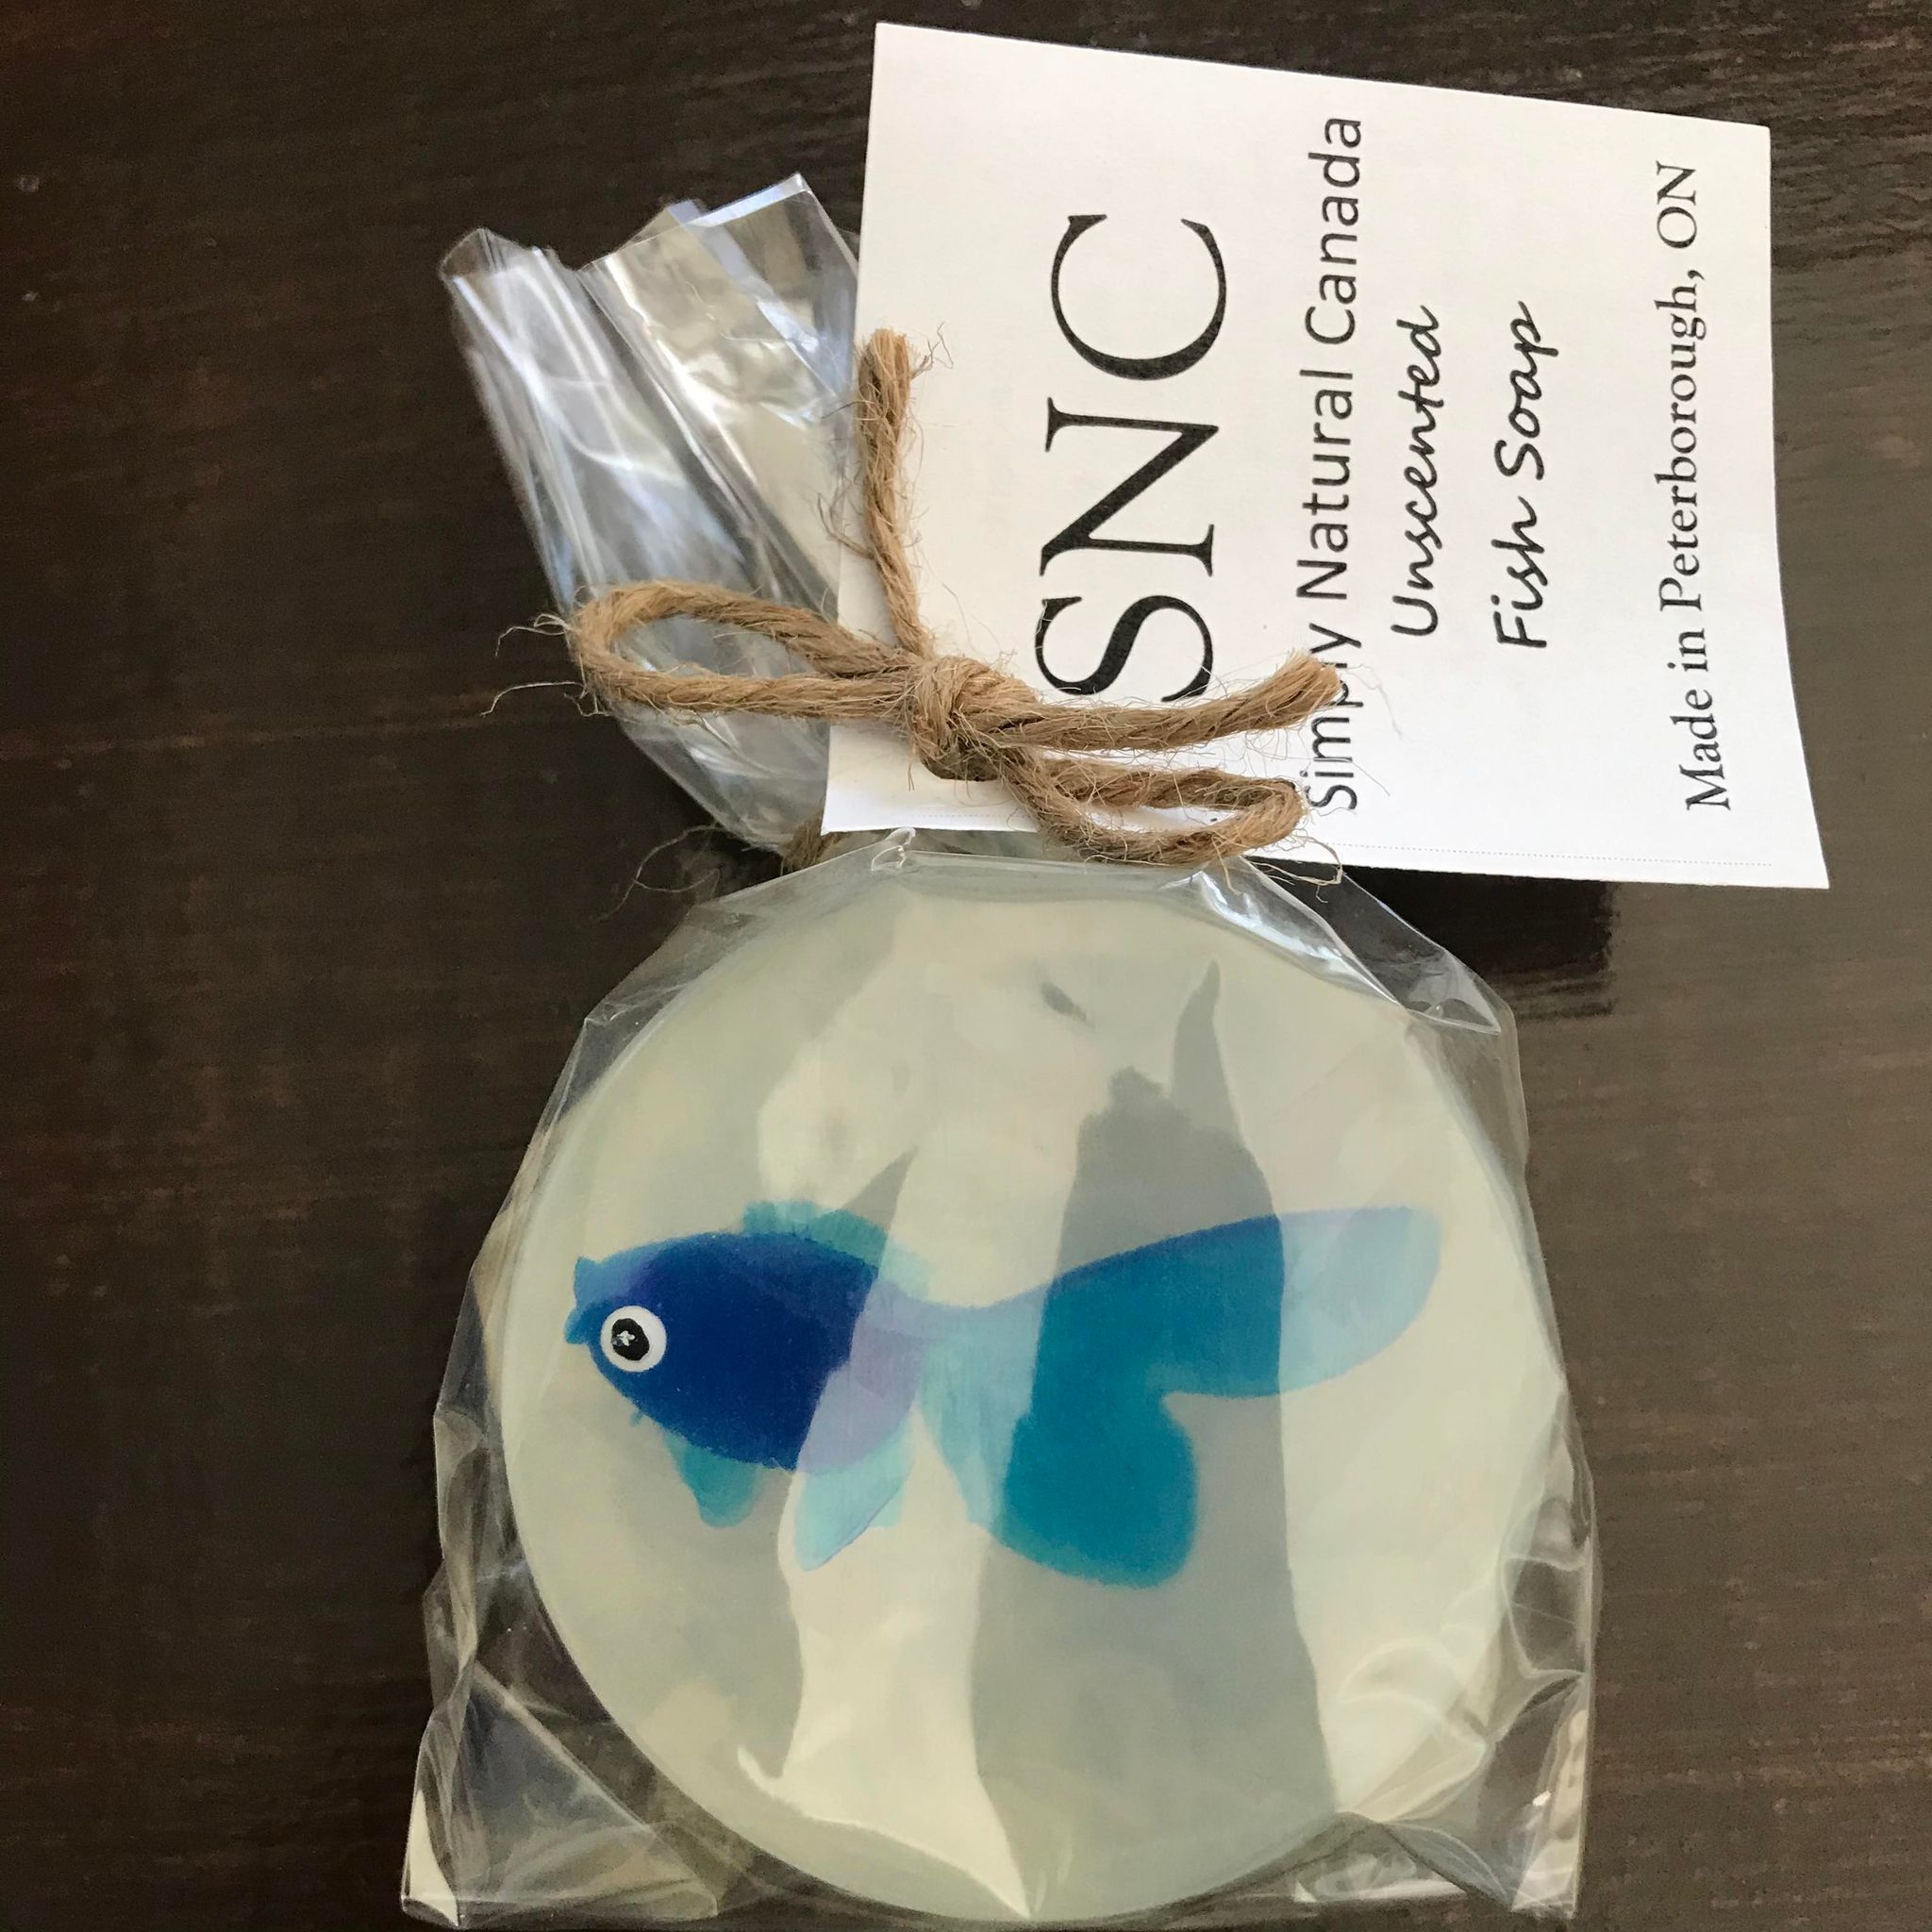 Blue vinyl fish inside a clear round vegetable glycerin soap packaged inside a compostable bag and made in Canada by Simply Natural Canada